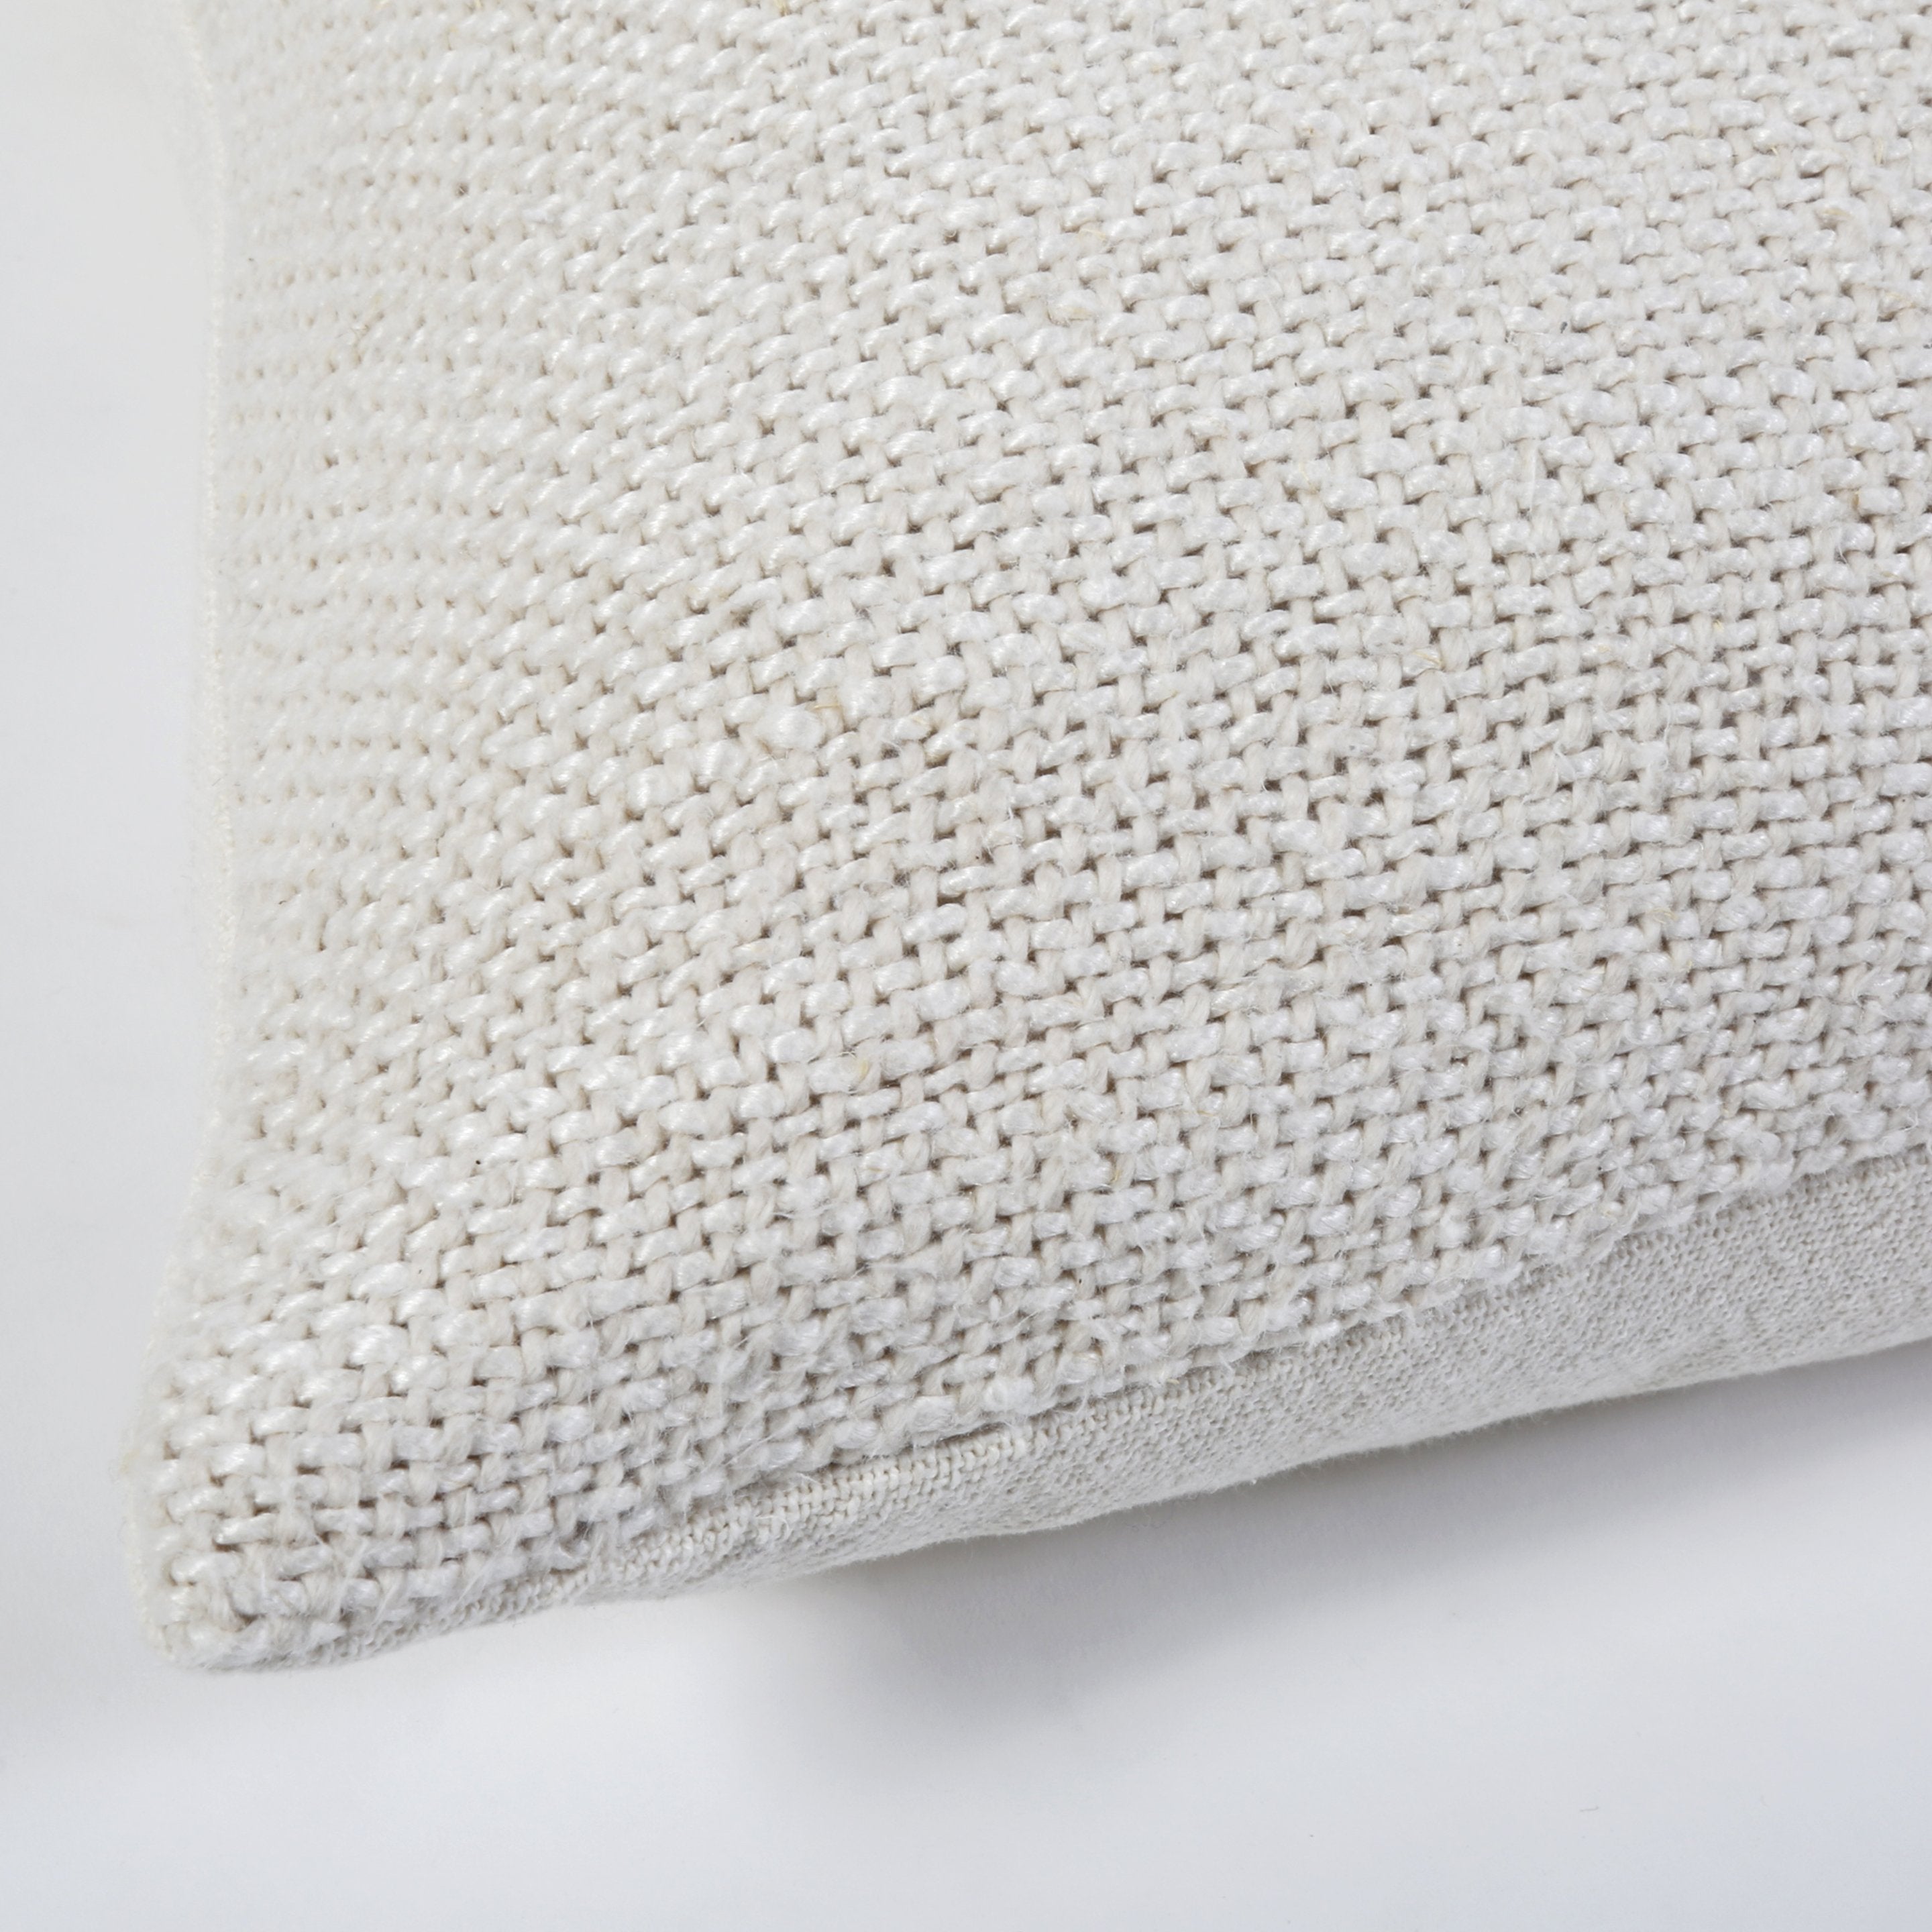 Hendrick 14"X40" PILLOW WITH INSERT - 7 colors-Pom Pom at Home